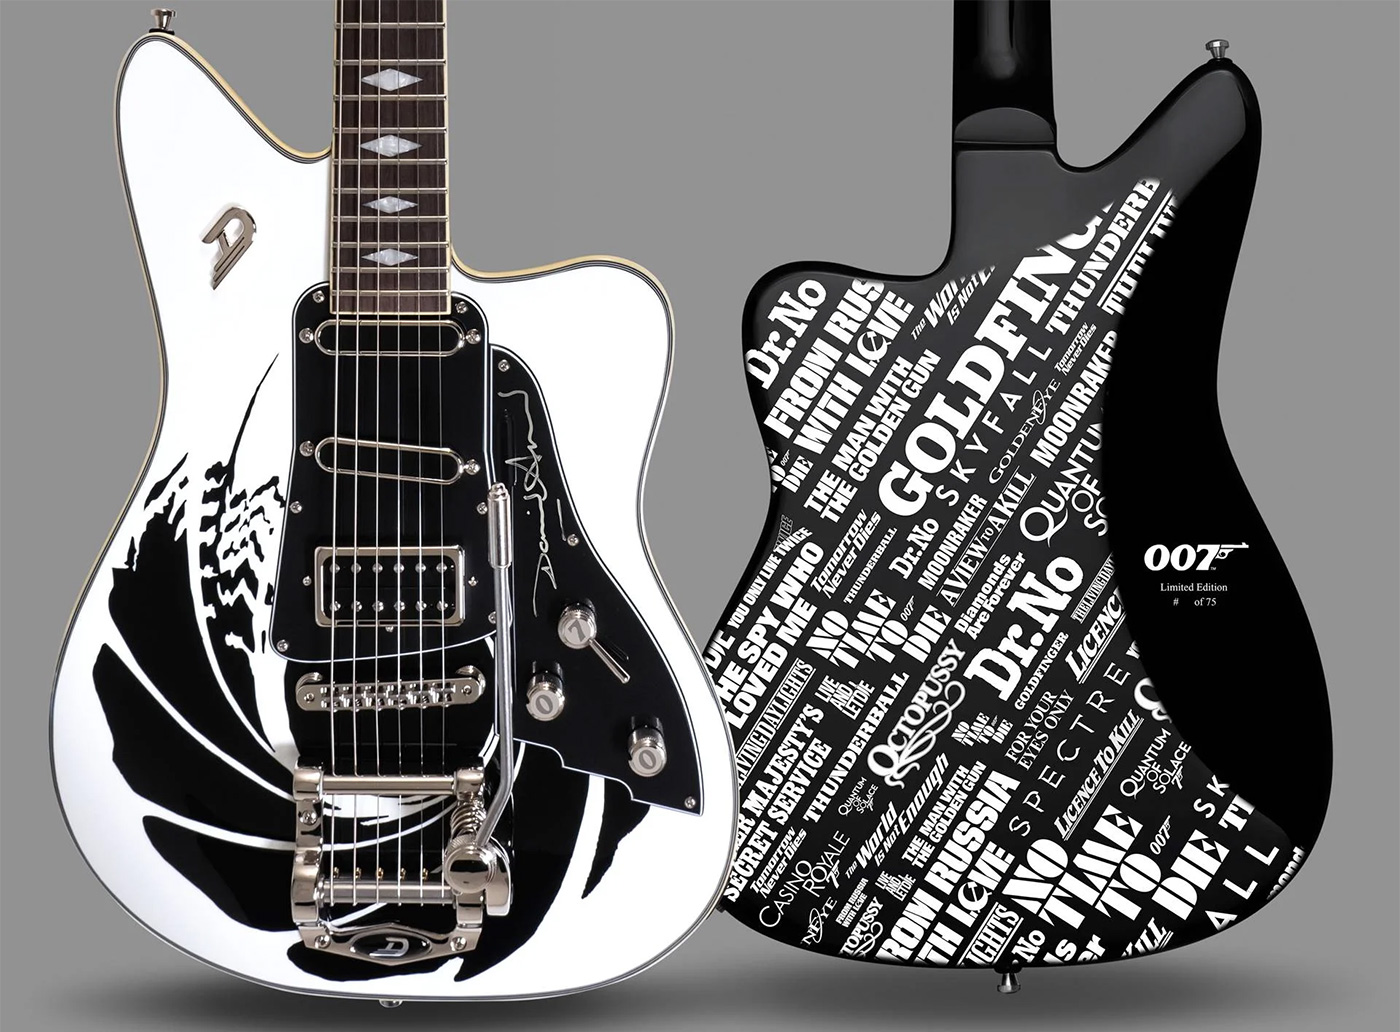 Limited Edition James Bond 007 Guitar by Duesenberg front and back films 25